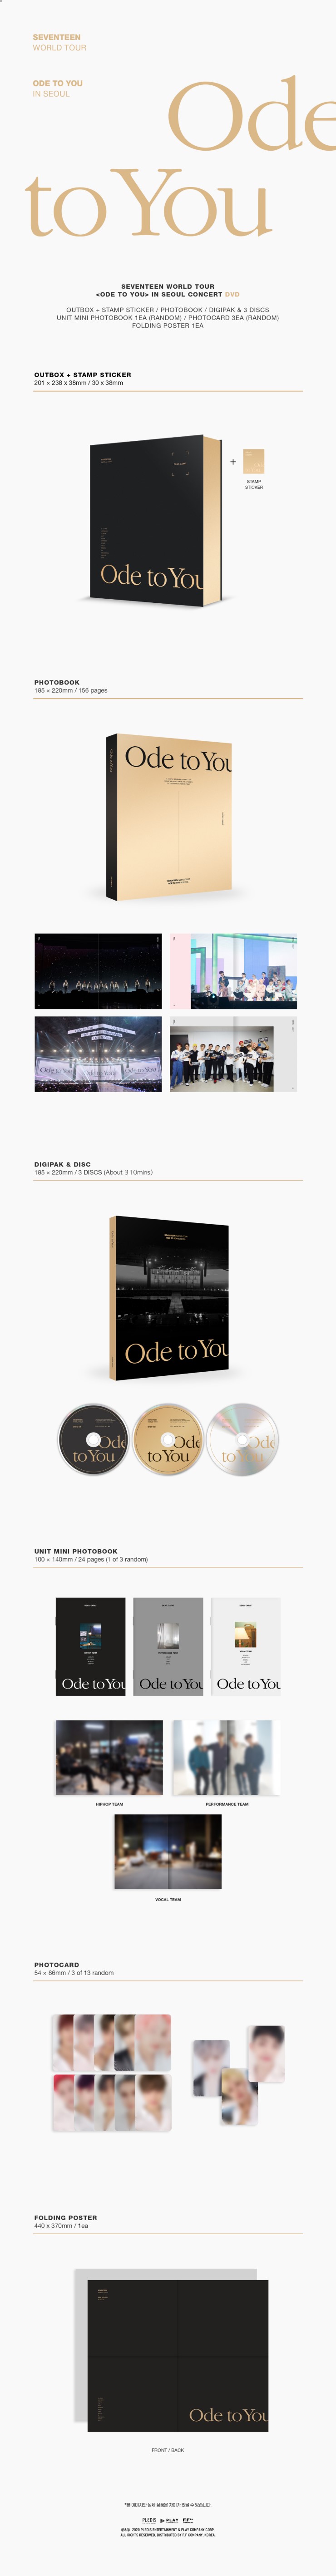 SEVENTEEN(세븐틴) - WORLD TOUR ODE TO YOU IN SEOUL DVD